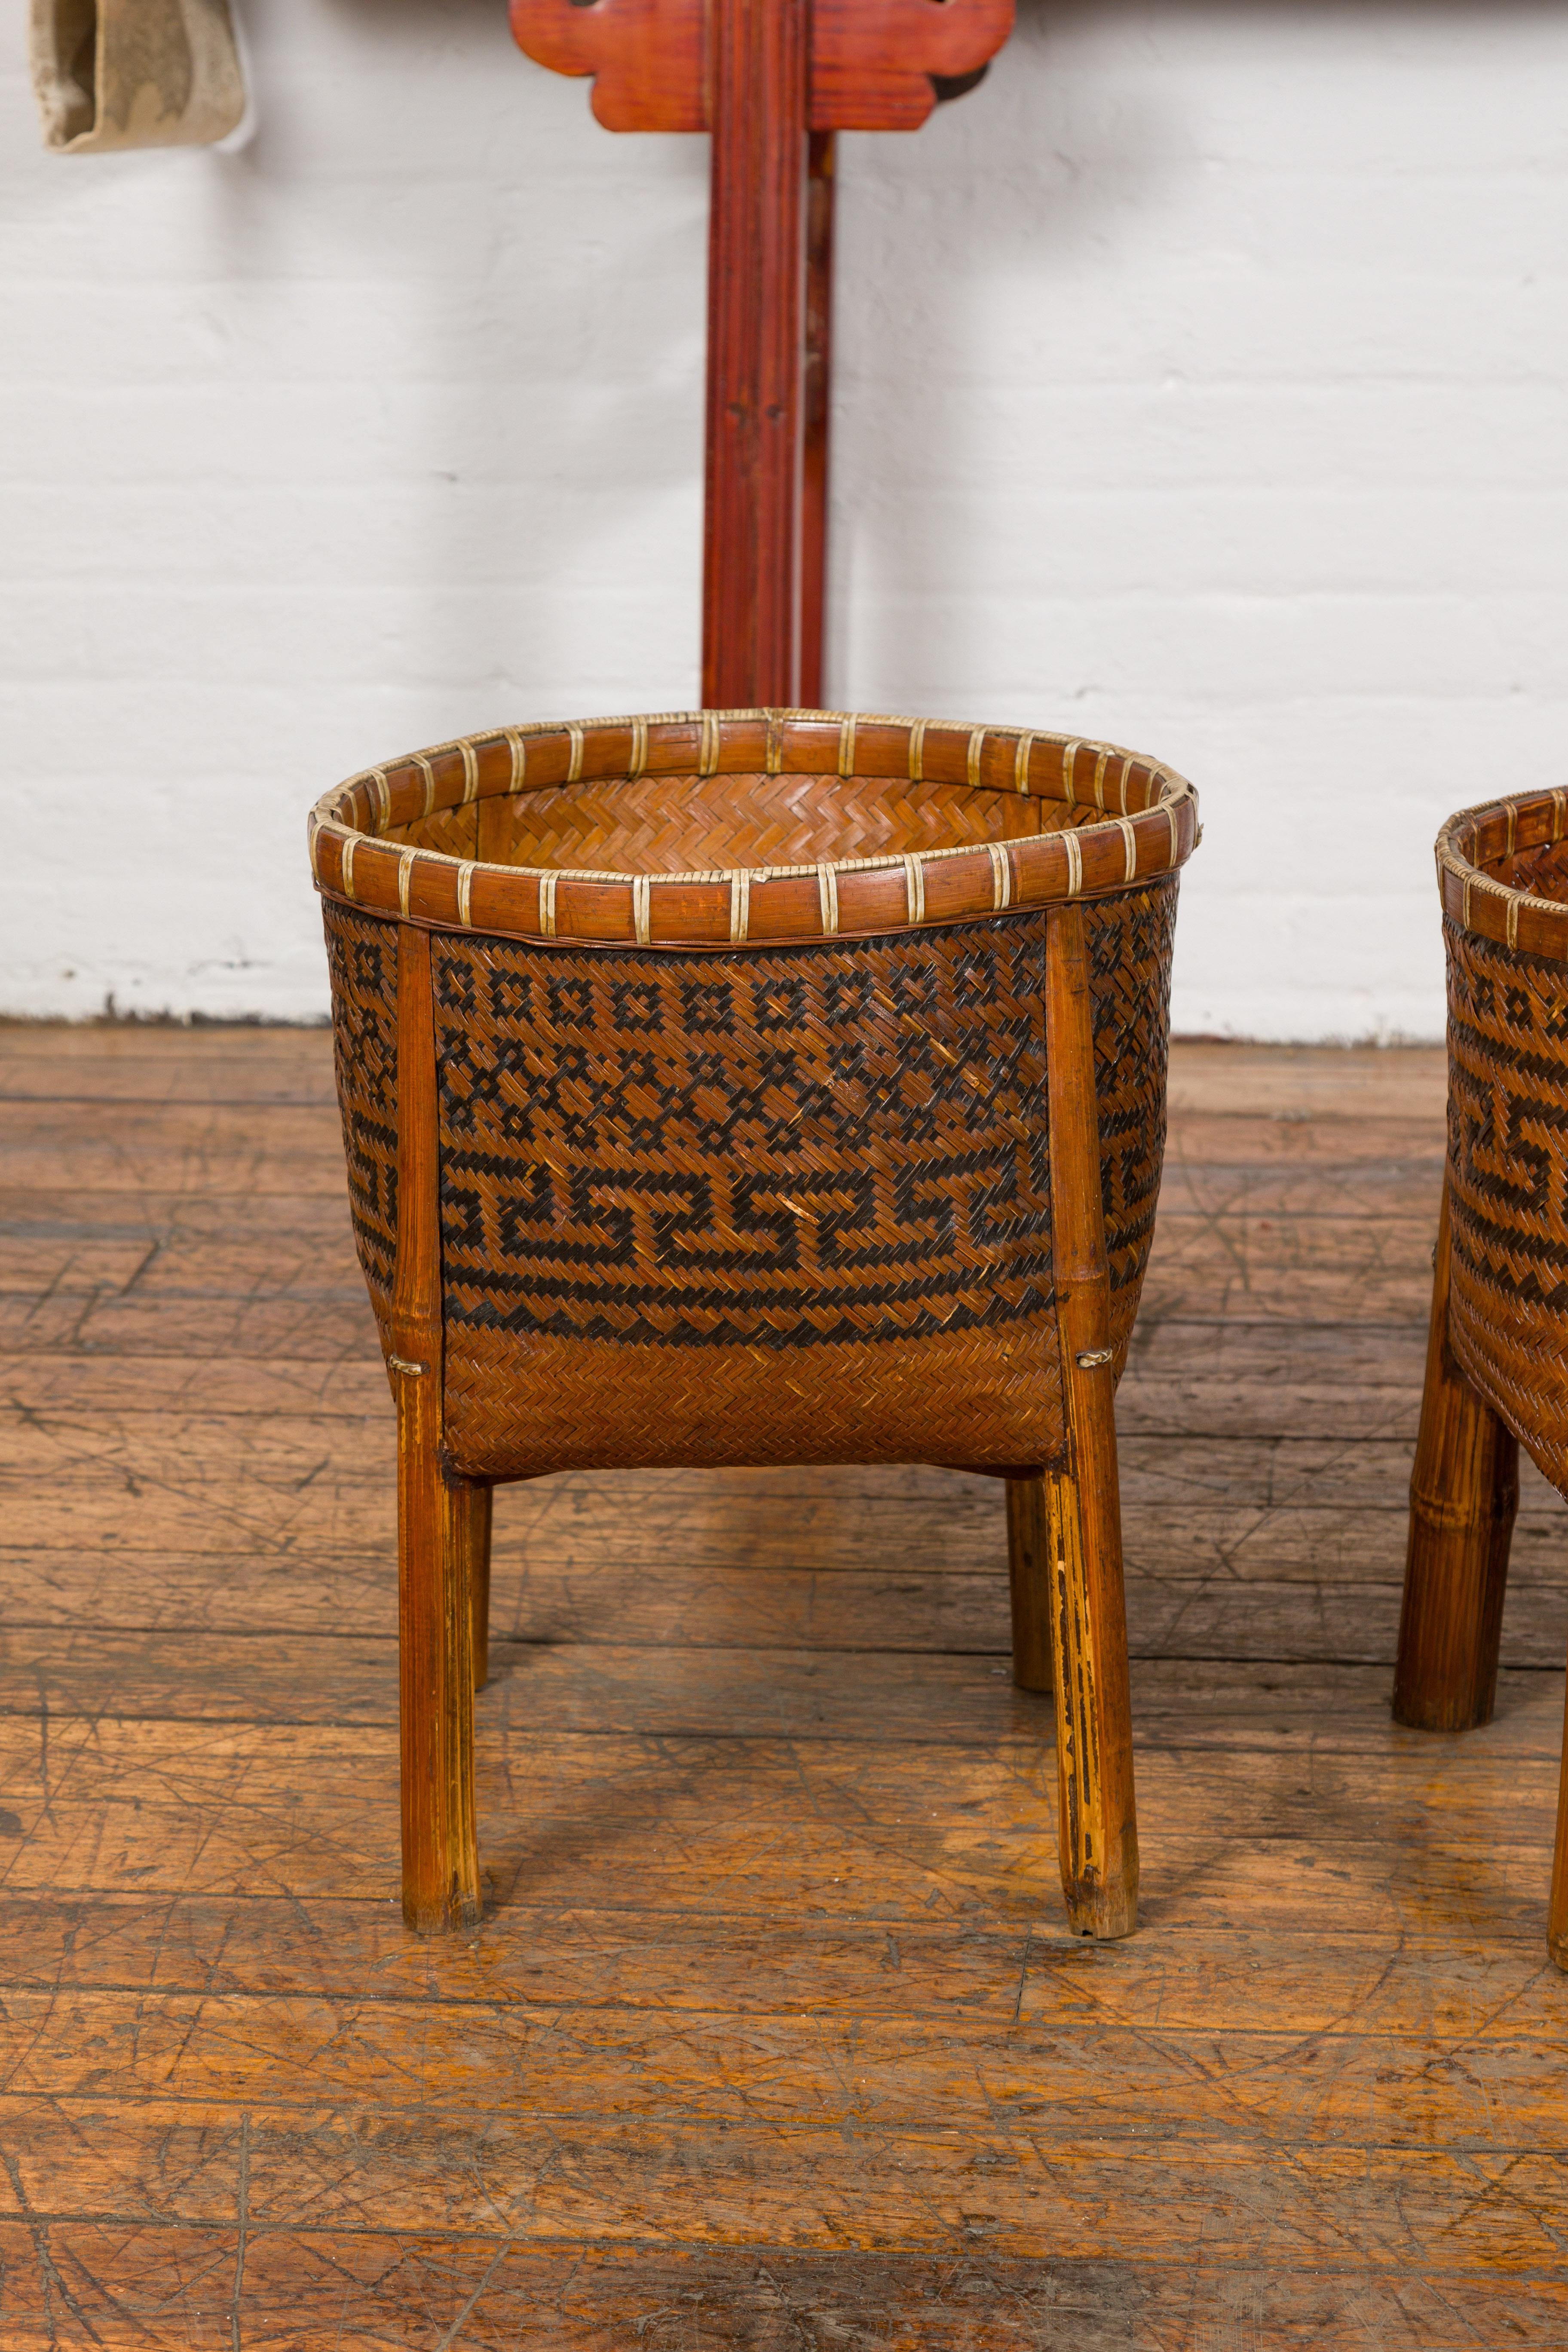 Rustic Woven Rattan Baskets on Legs with Greek Key Motifs, Four Pieces Sold Each For Sale